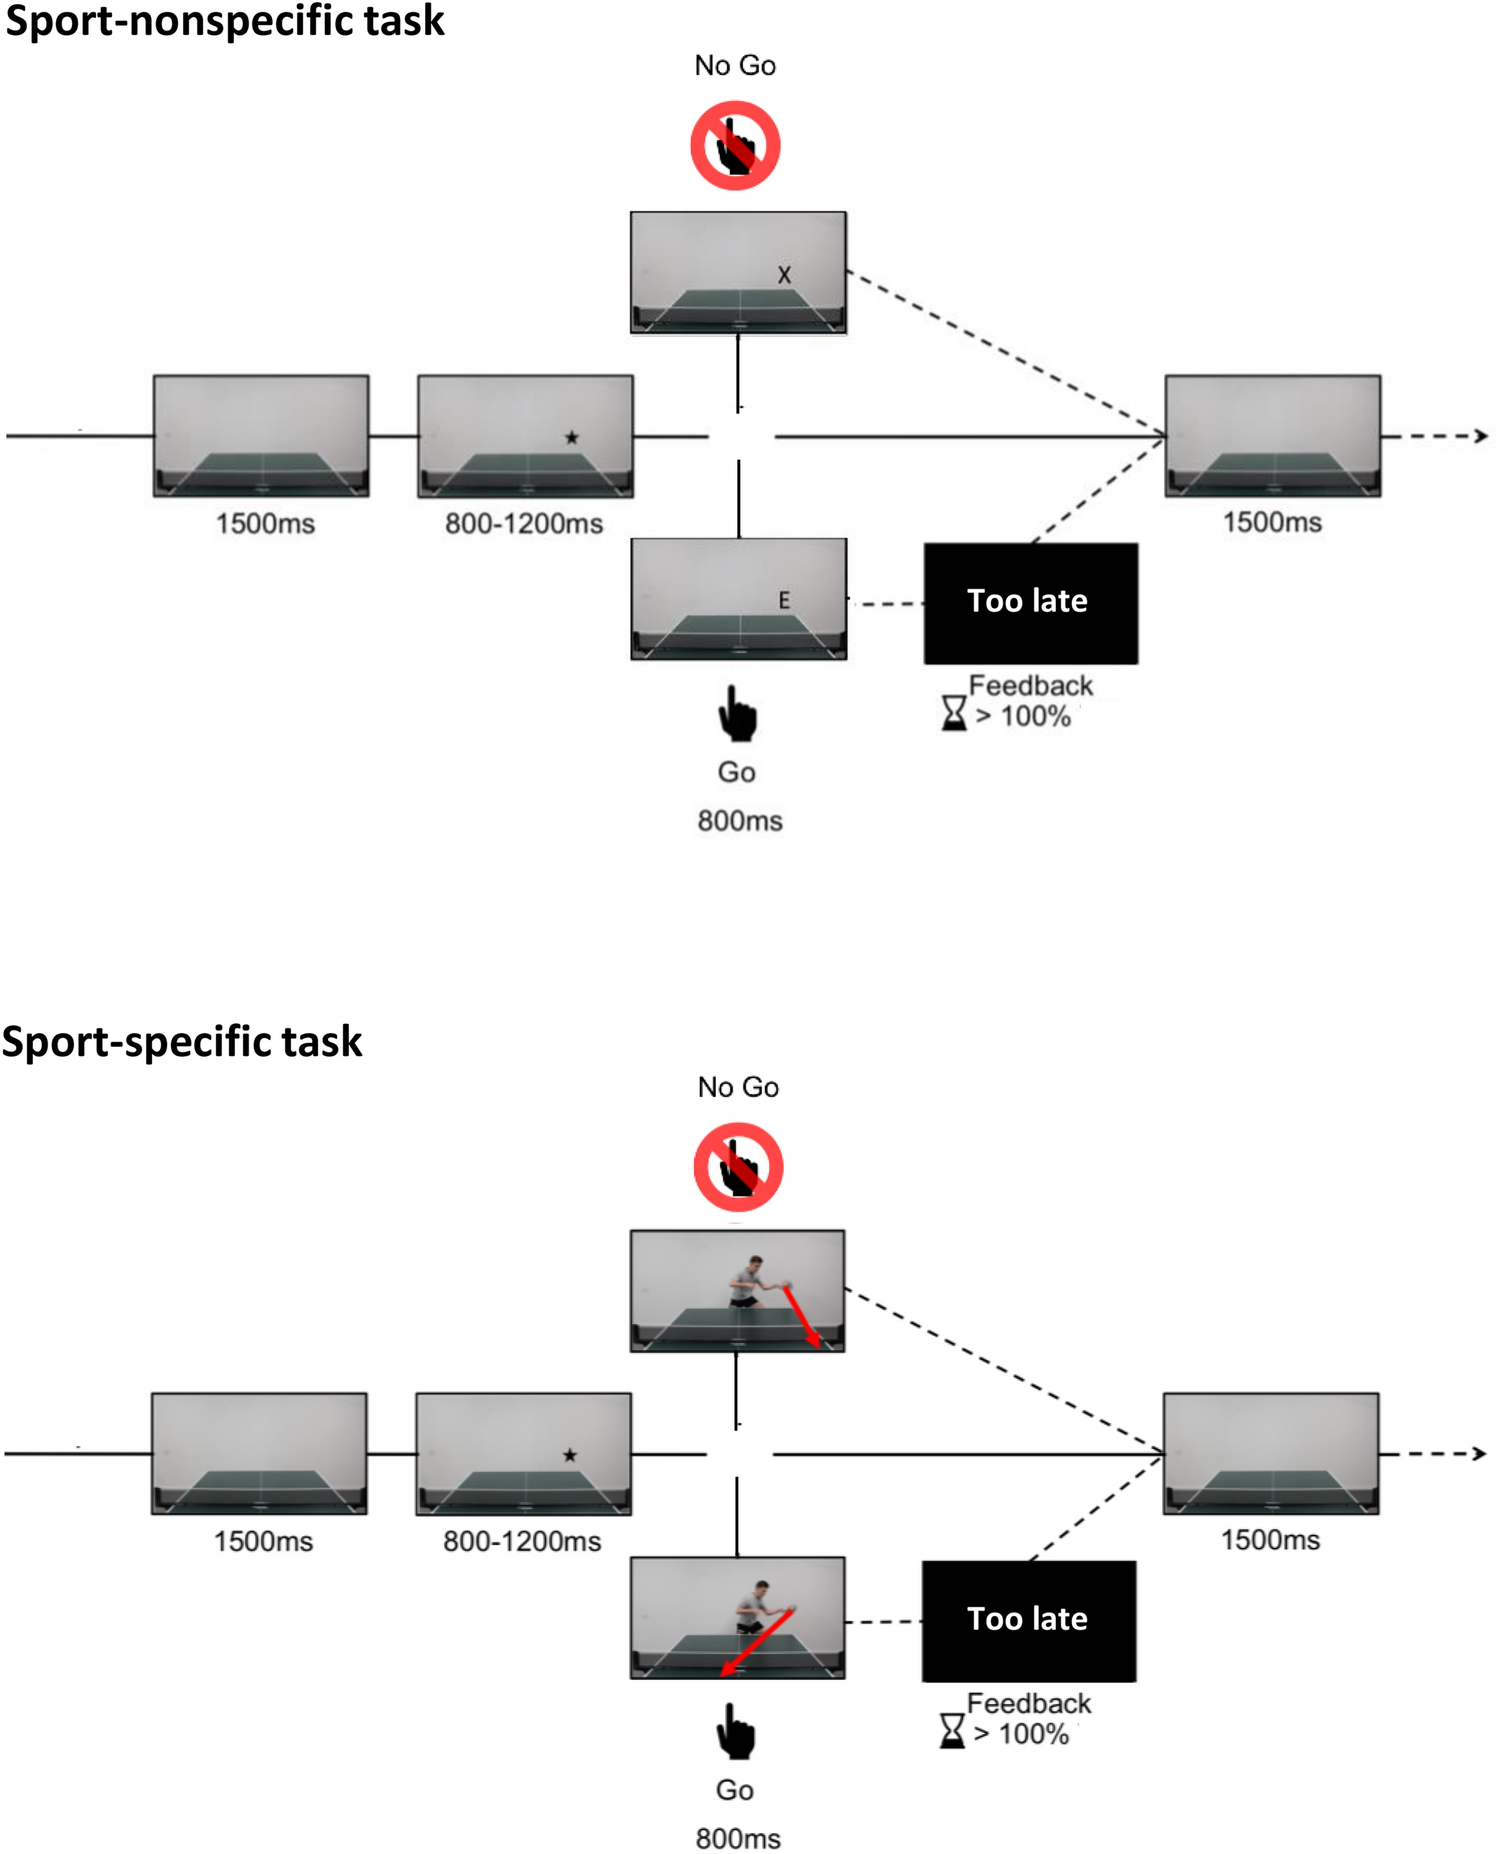 The field of expertise modulates the time course of neural processes  associated with inhibitory control in a sport decision-making task |  Scientific Reports